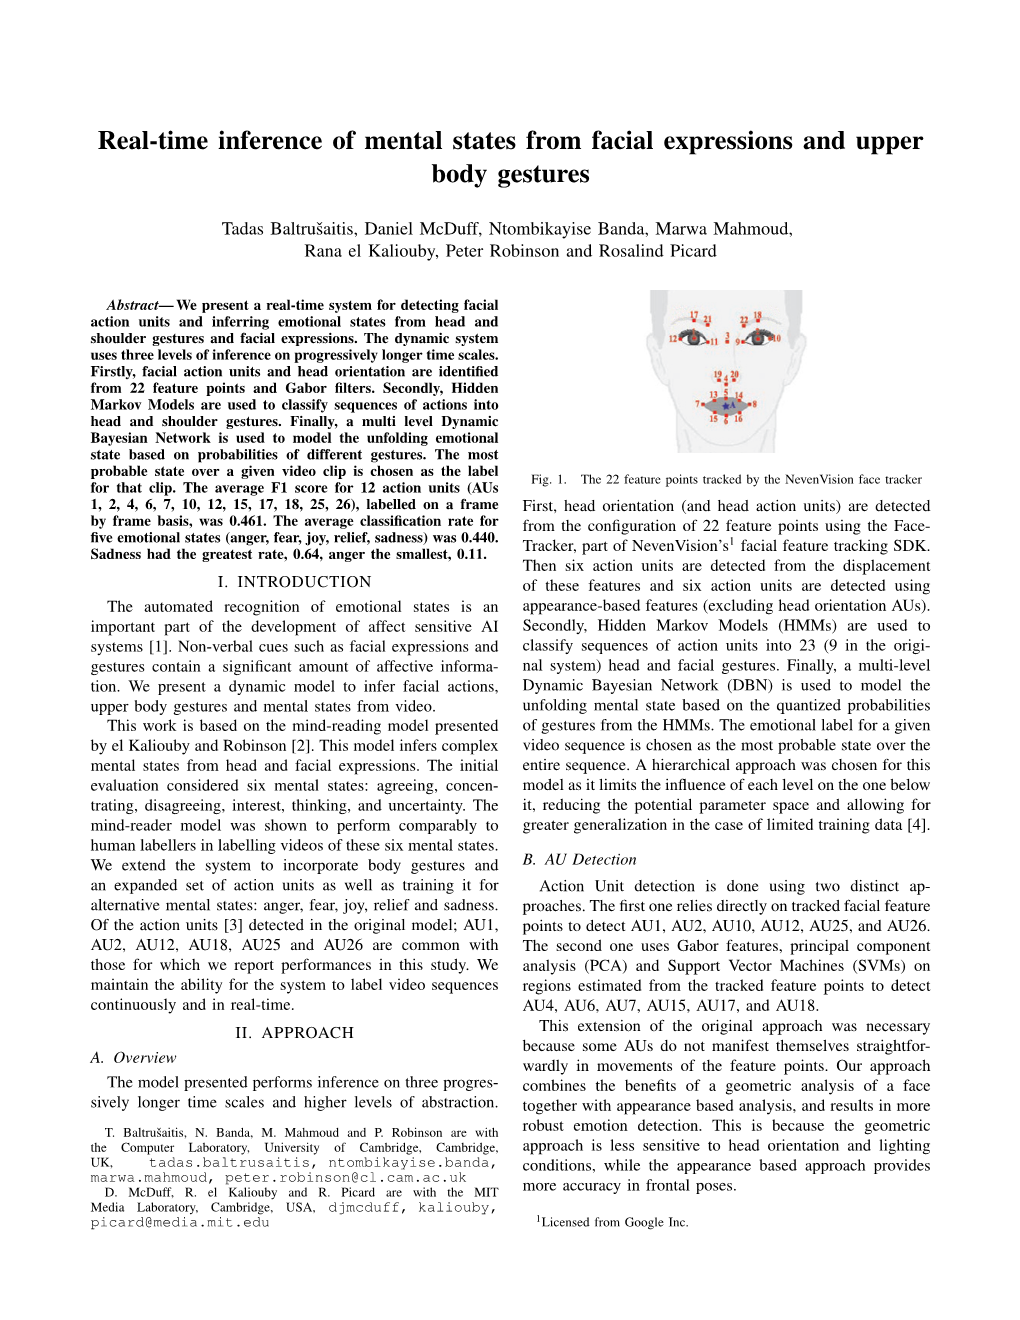 Real-Time Inference of Mental States from Facial Expressions and Upper Body Gestures